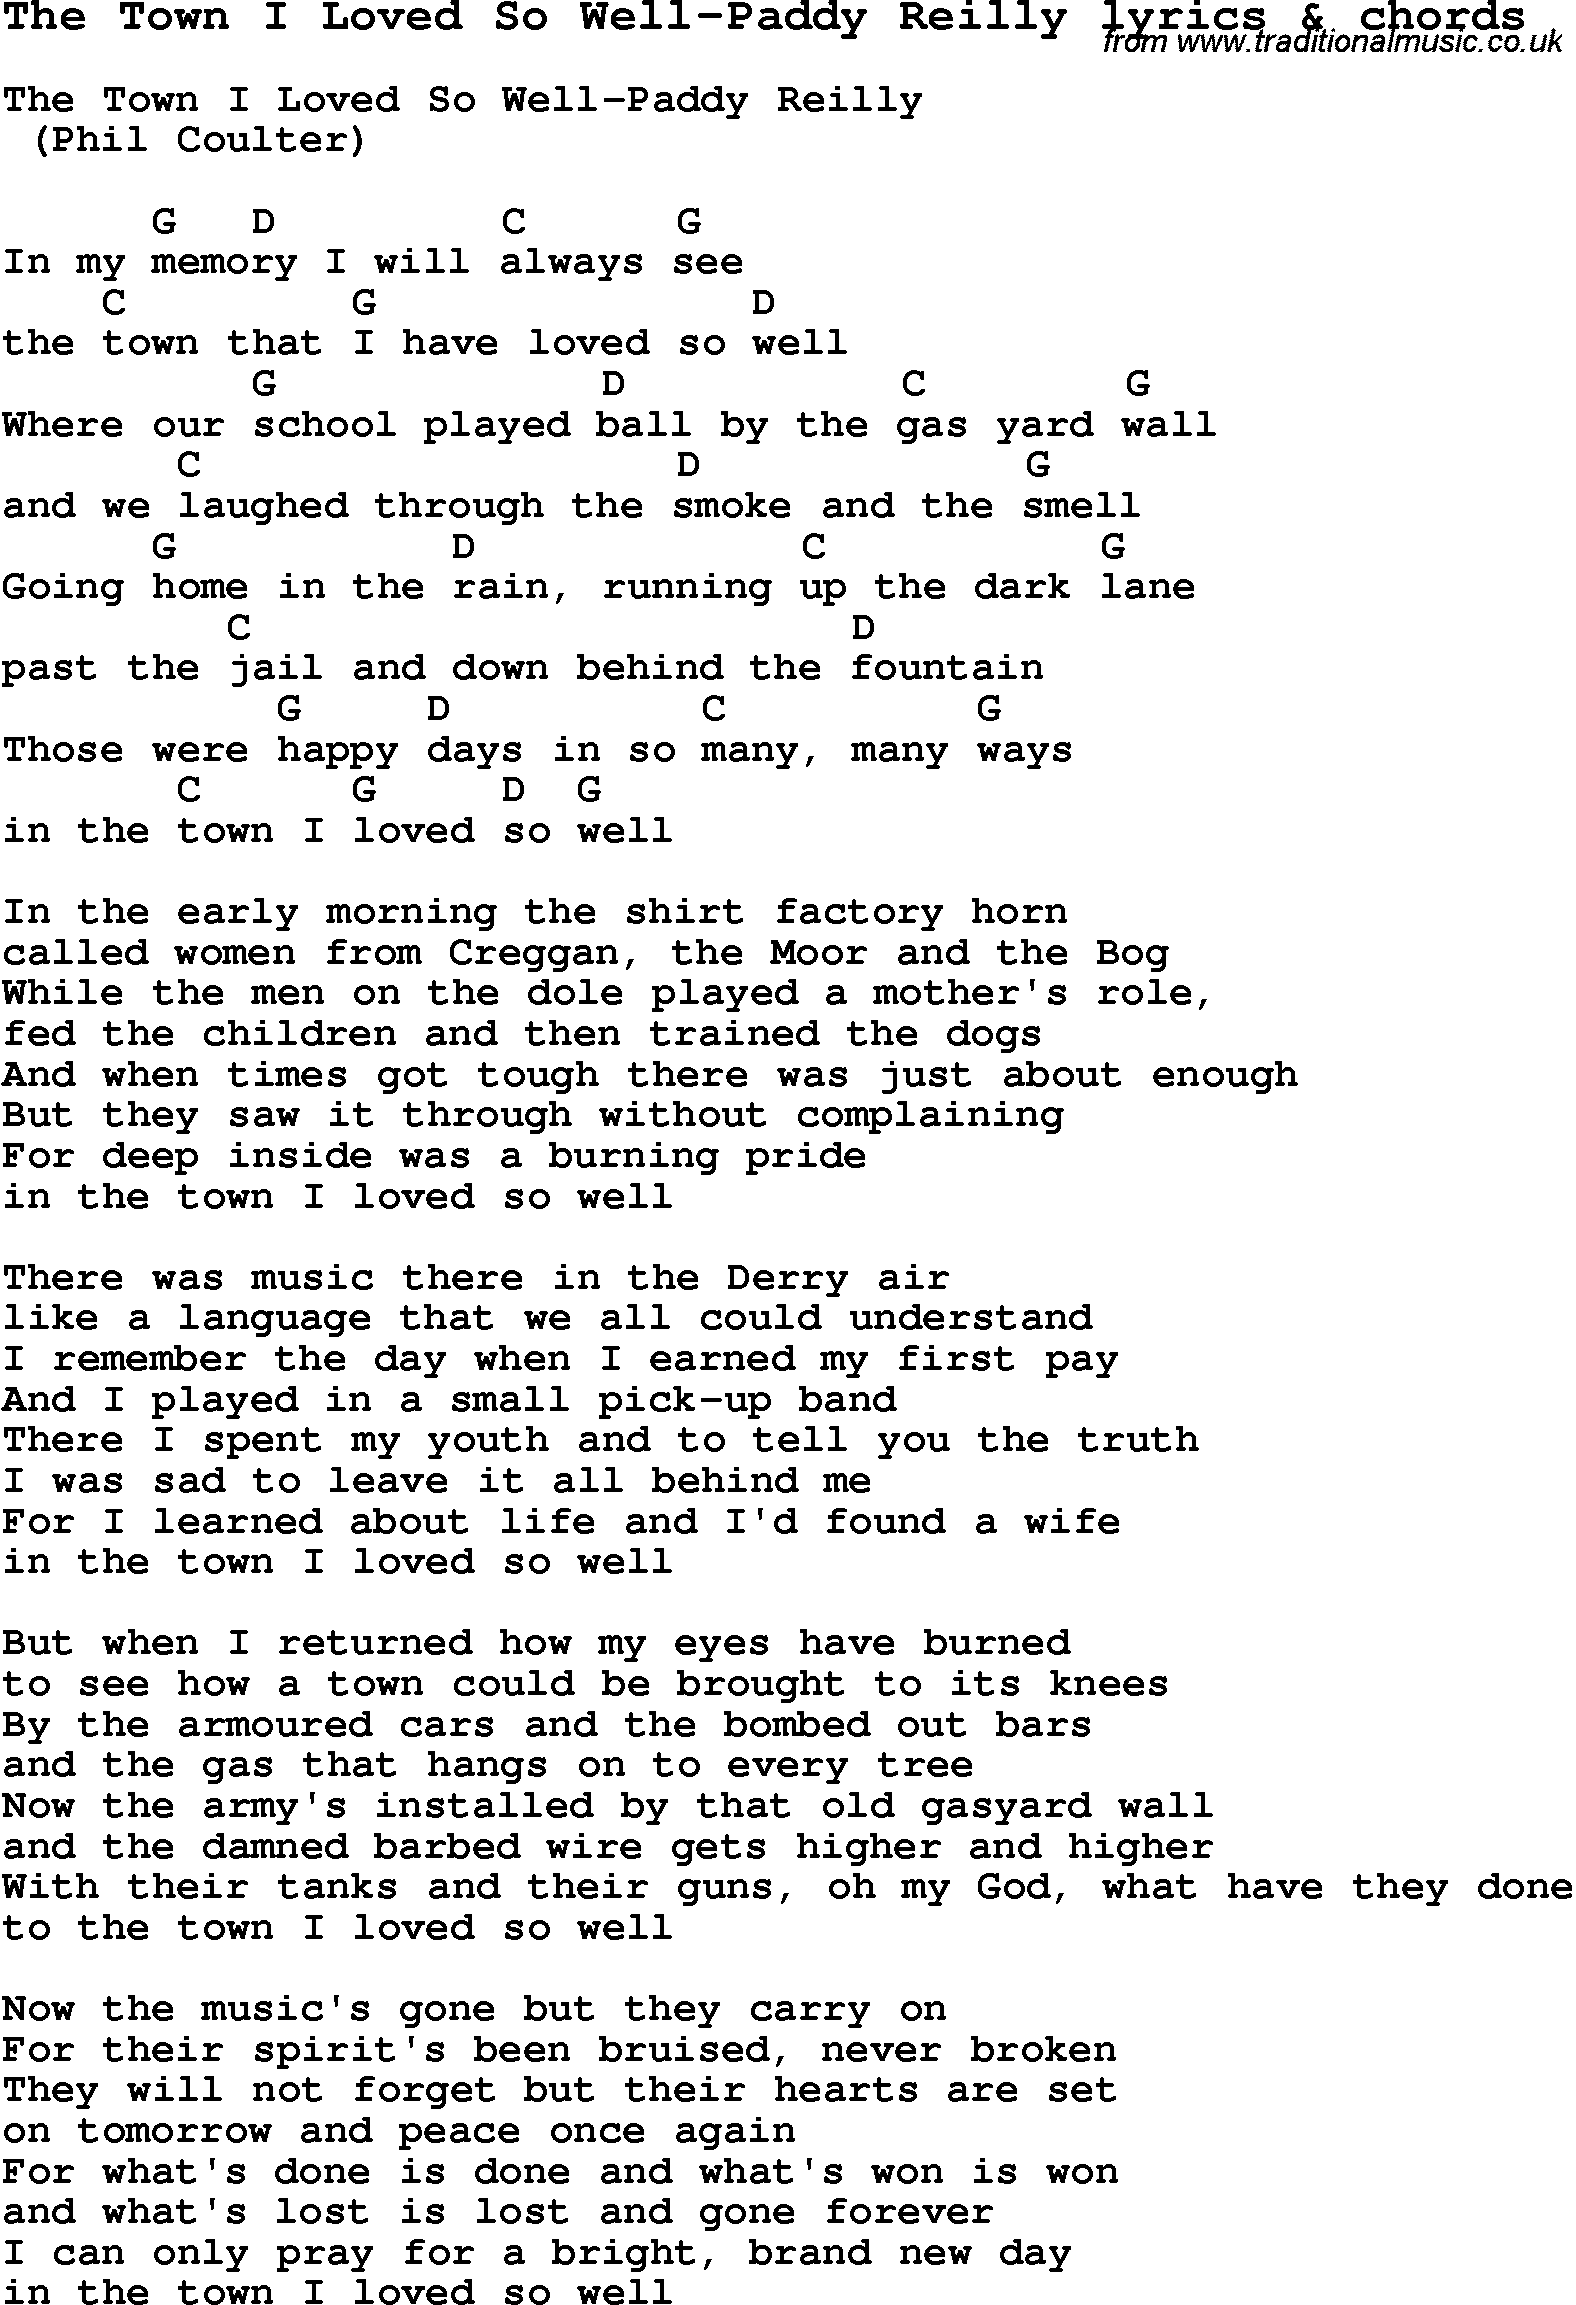 Love Song Lyrics for: The Town I Loved So Well-Paddy Reilly with chords for Ukulele, Guitar Banjo etc.